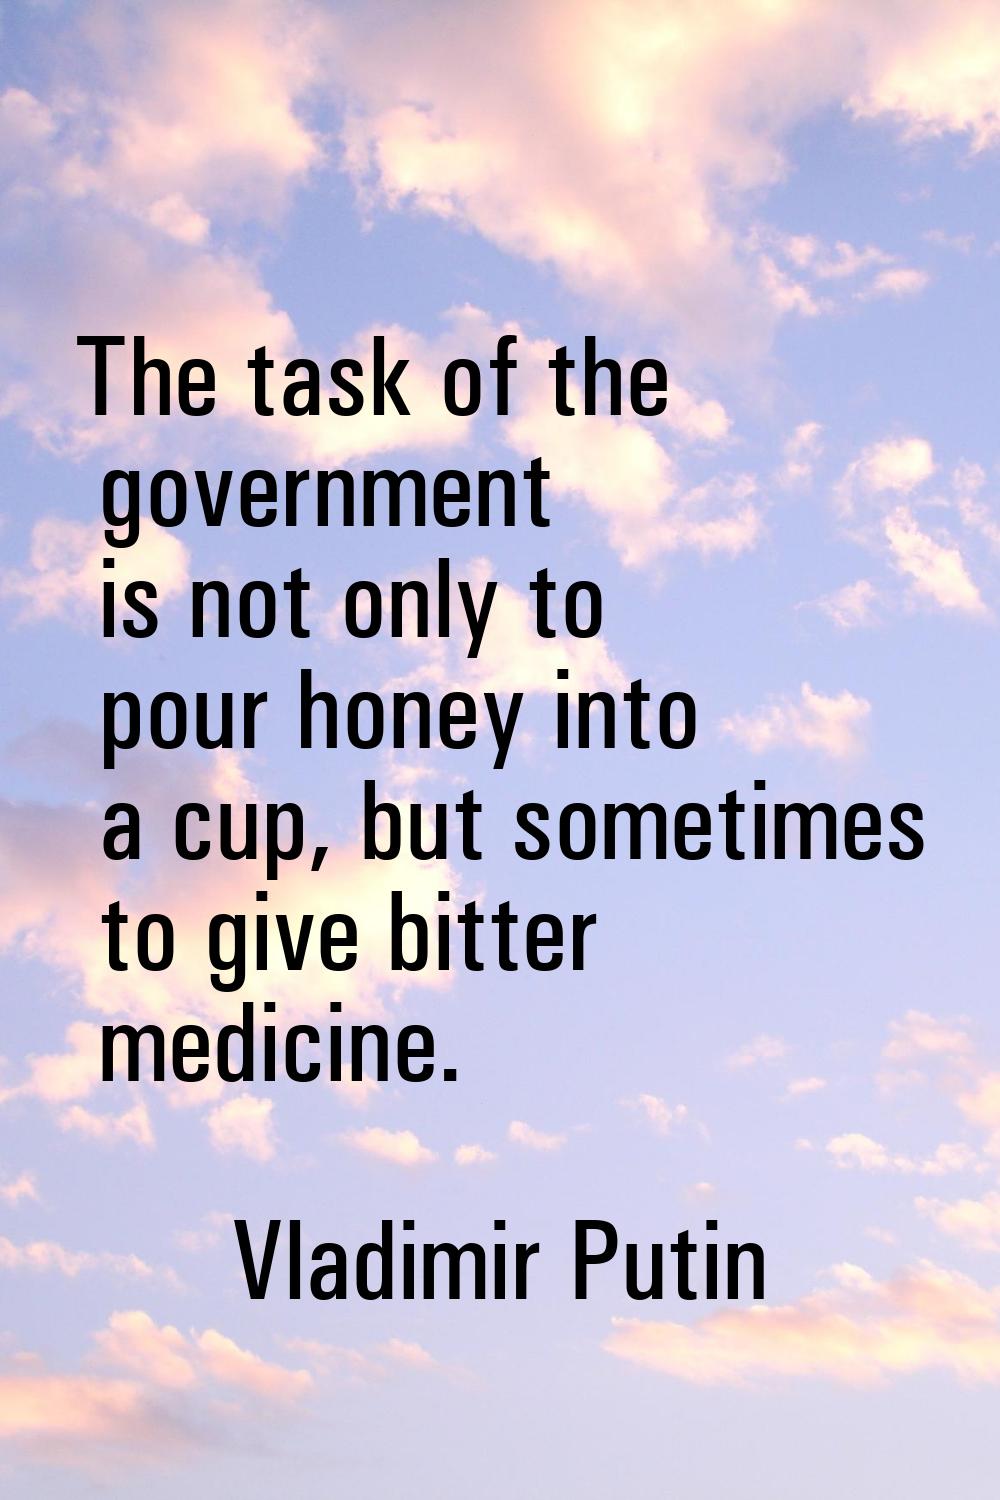 The task of the government is not only to pour honey into a cup, but sometimes to give bitter medic